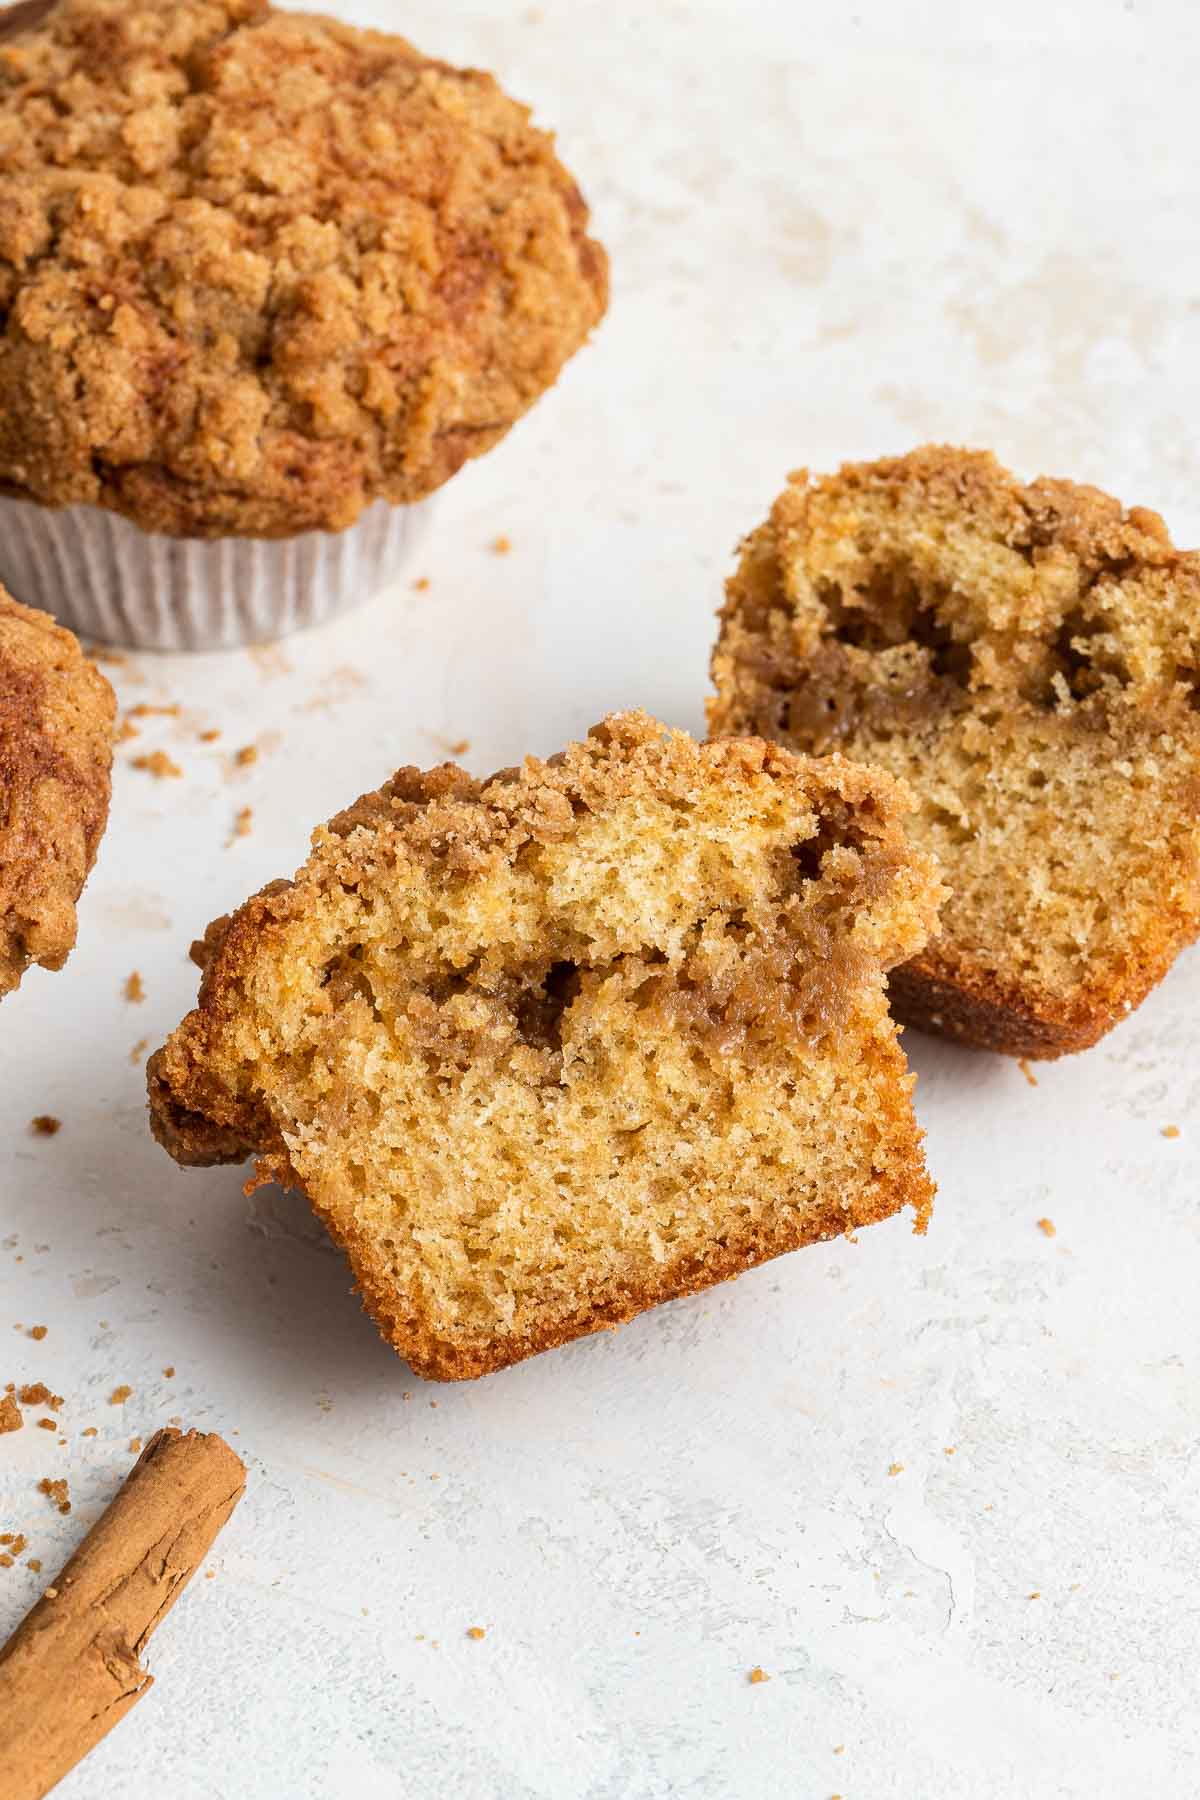 Coffee cake muffin sliced in half to show inner streusel filling.